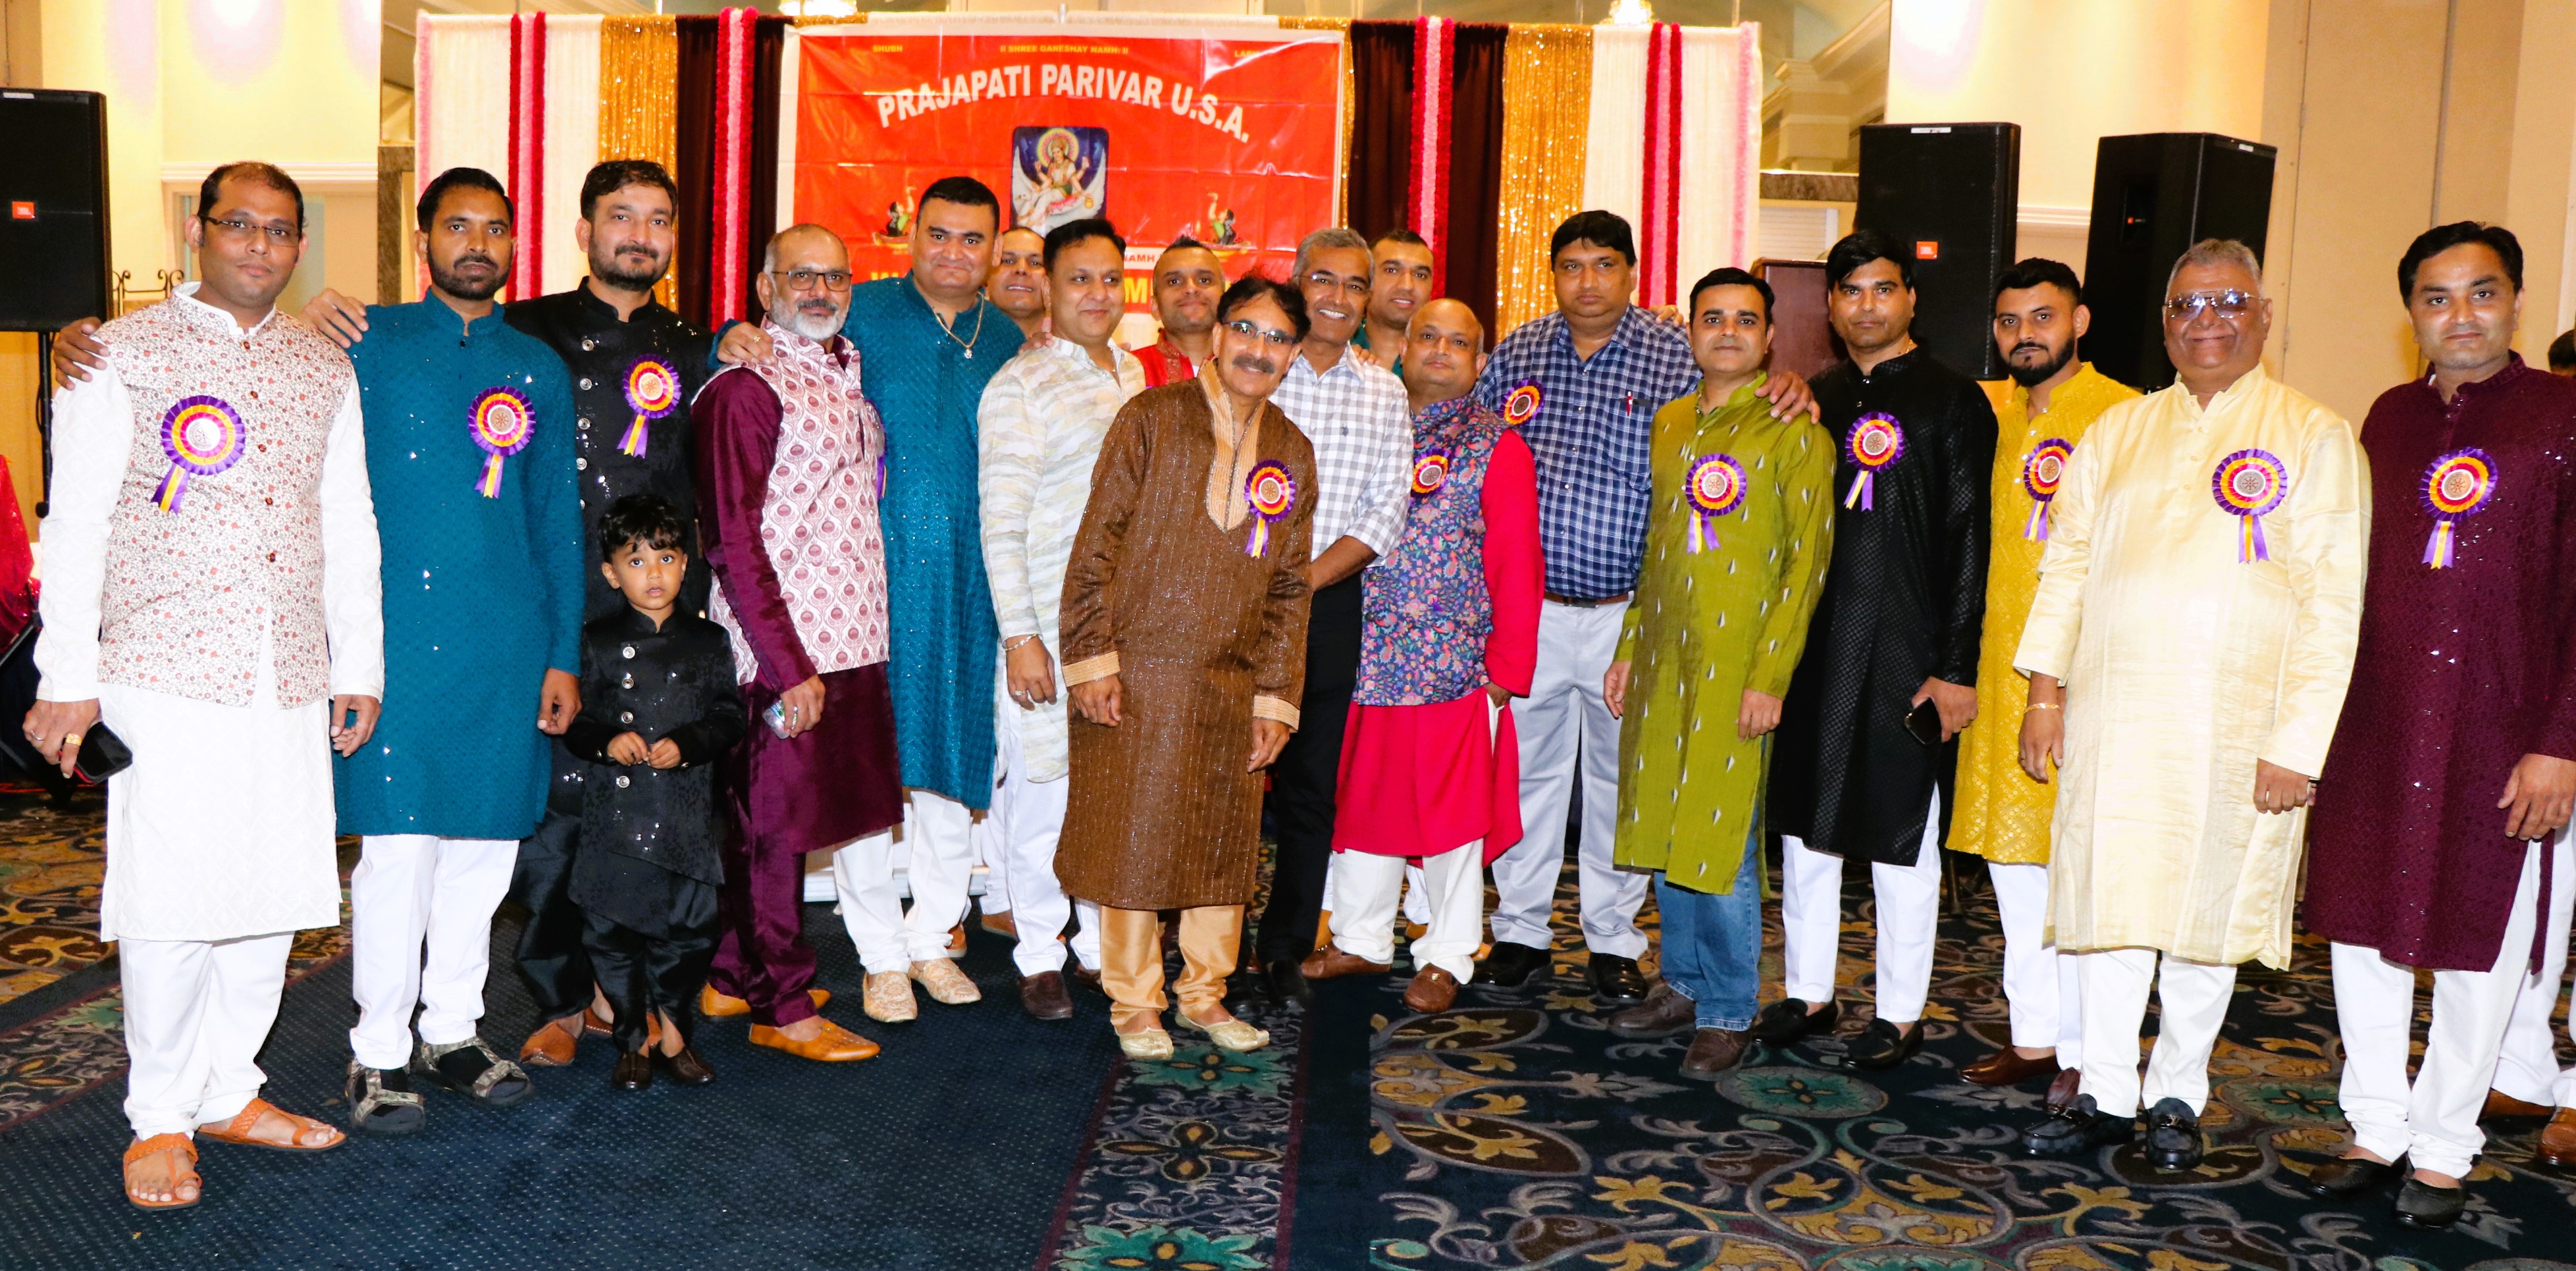 Prajapati Samaj’s global love convention was held in Downs Grove town of Chicago, USA